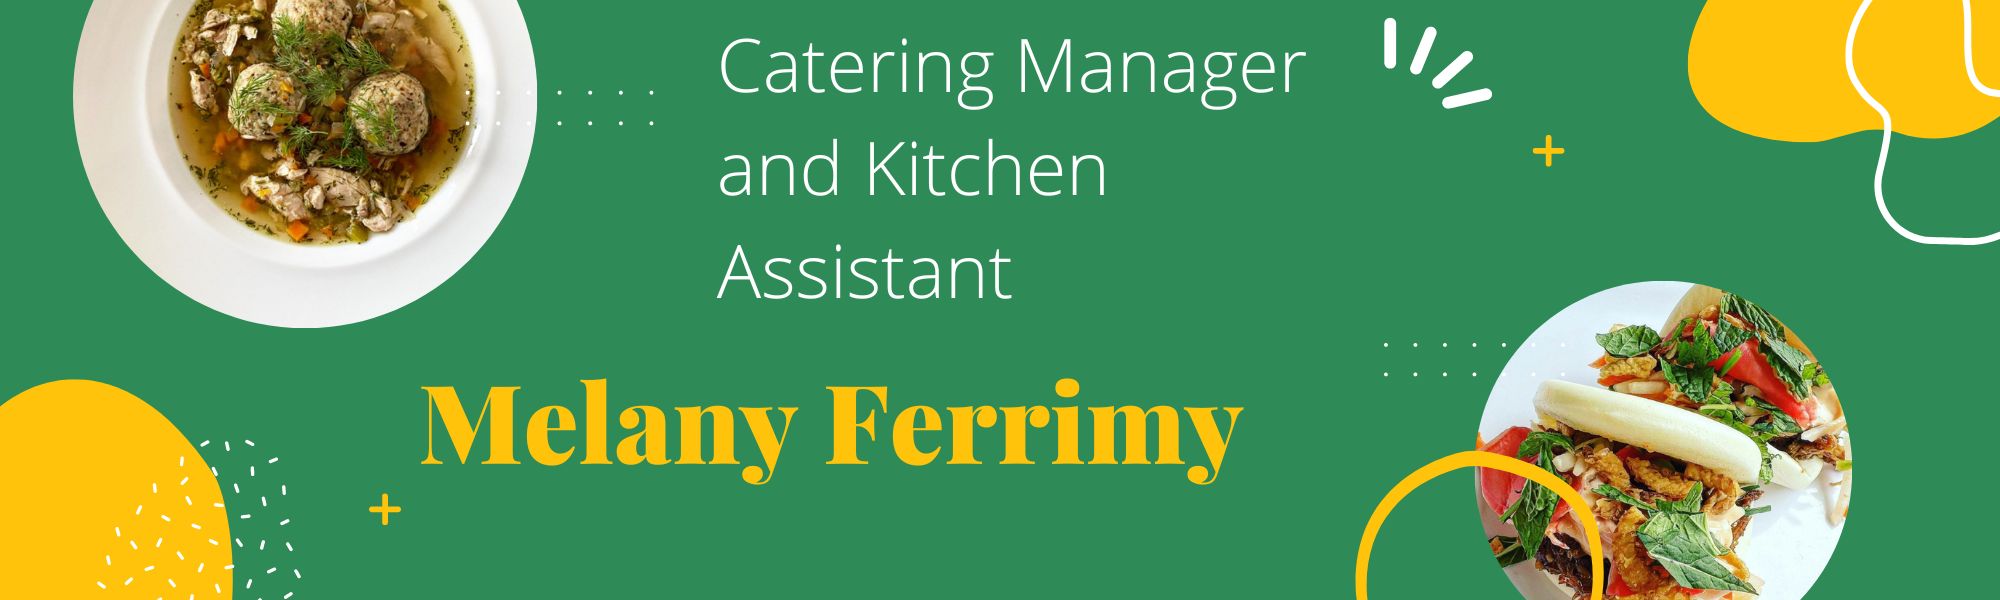 NEW%3A+Learn+about+Catering+Manager+and+Kitchen+Assistant+Melany+Ferrimy.